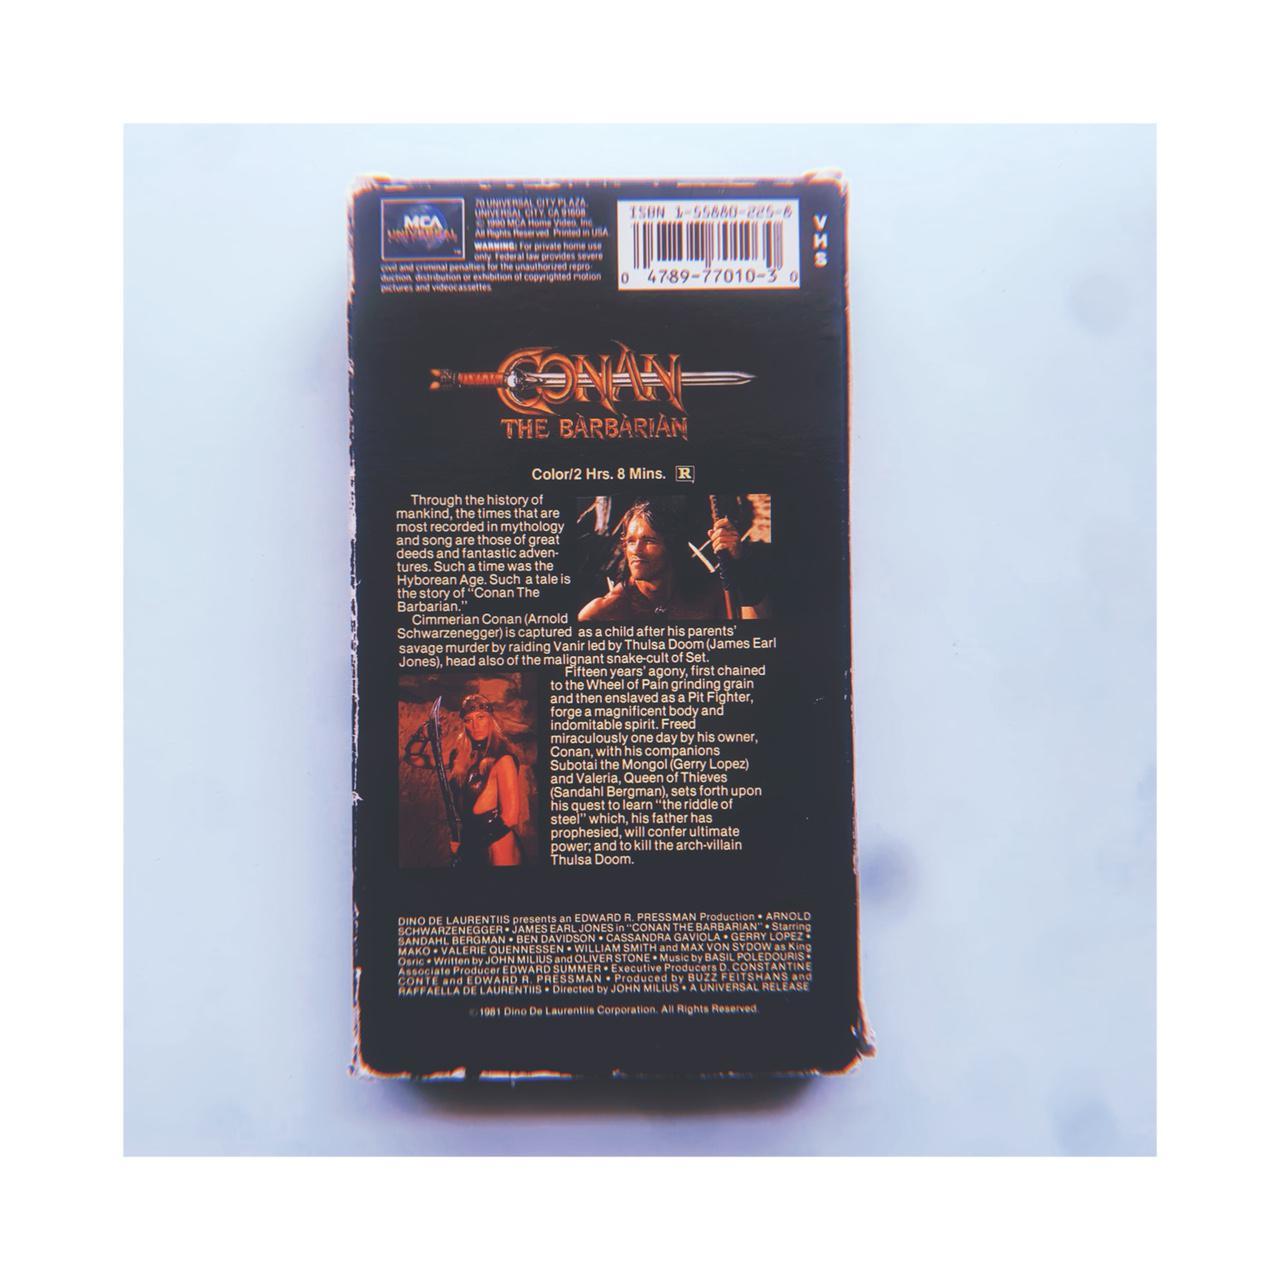 CONAN THE BARBARIAN 1981 VHS. With the one and only... - Depop